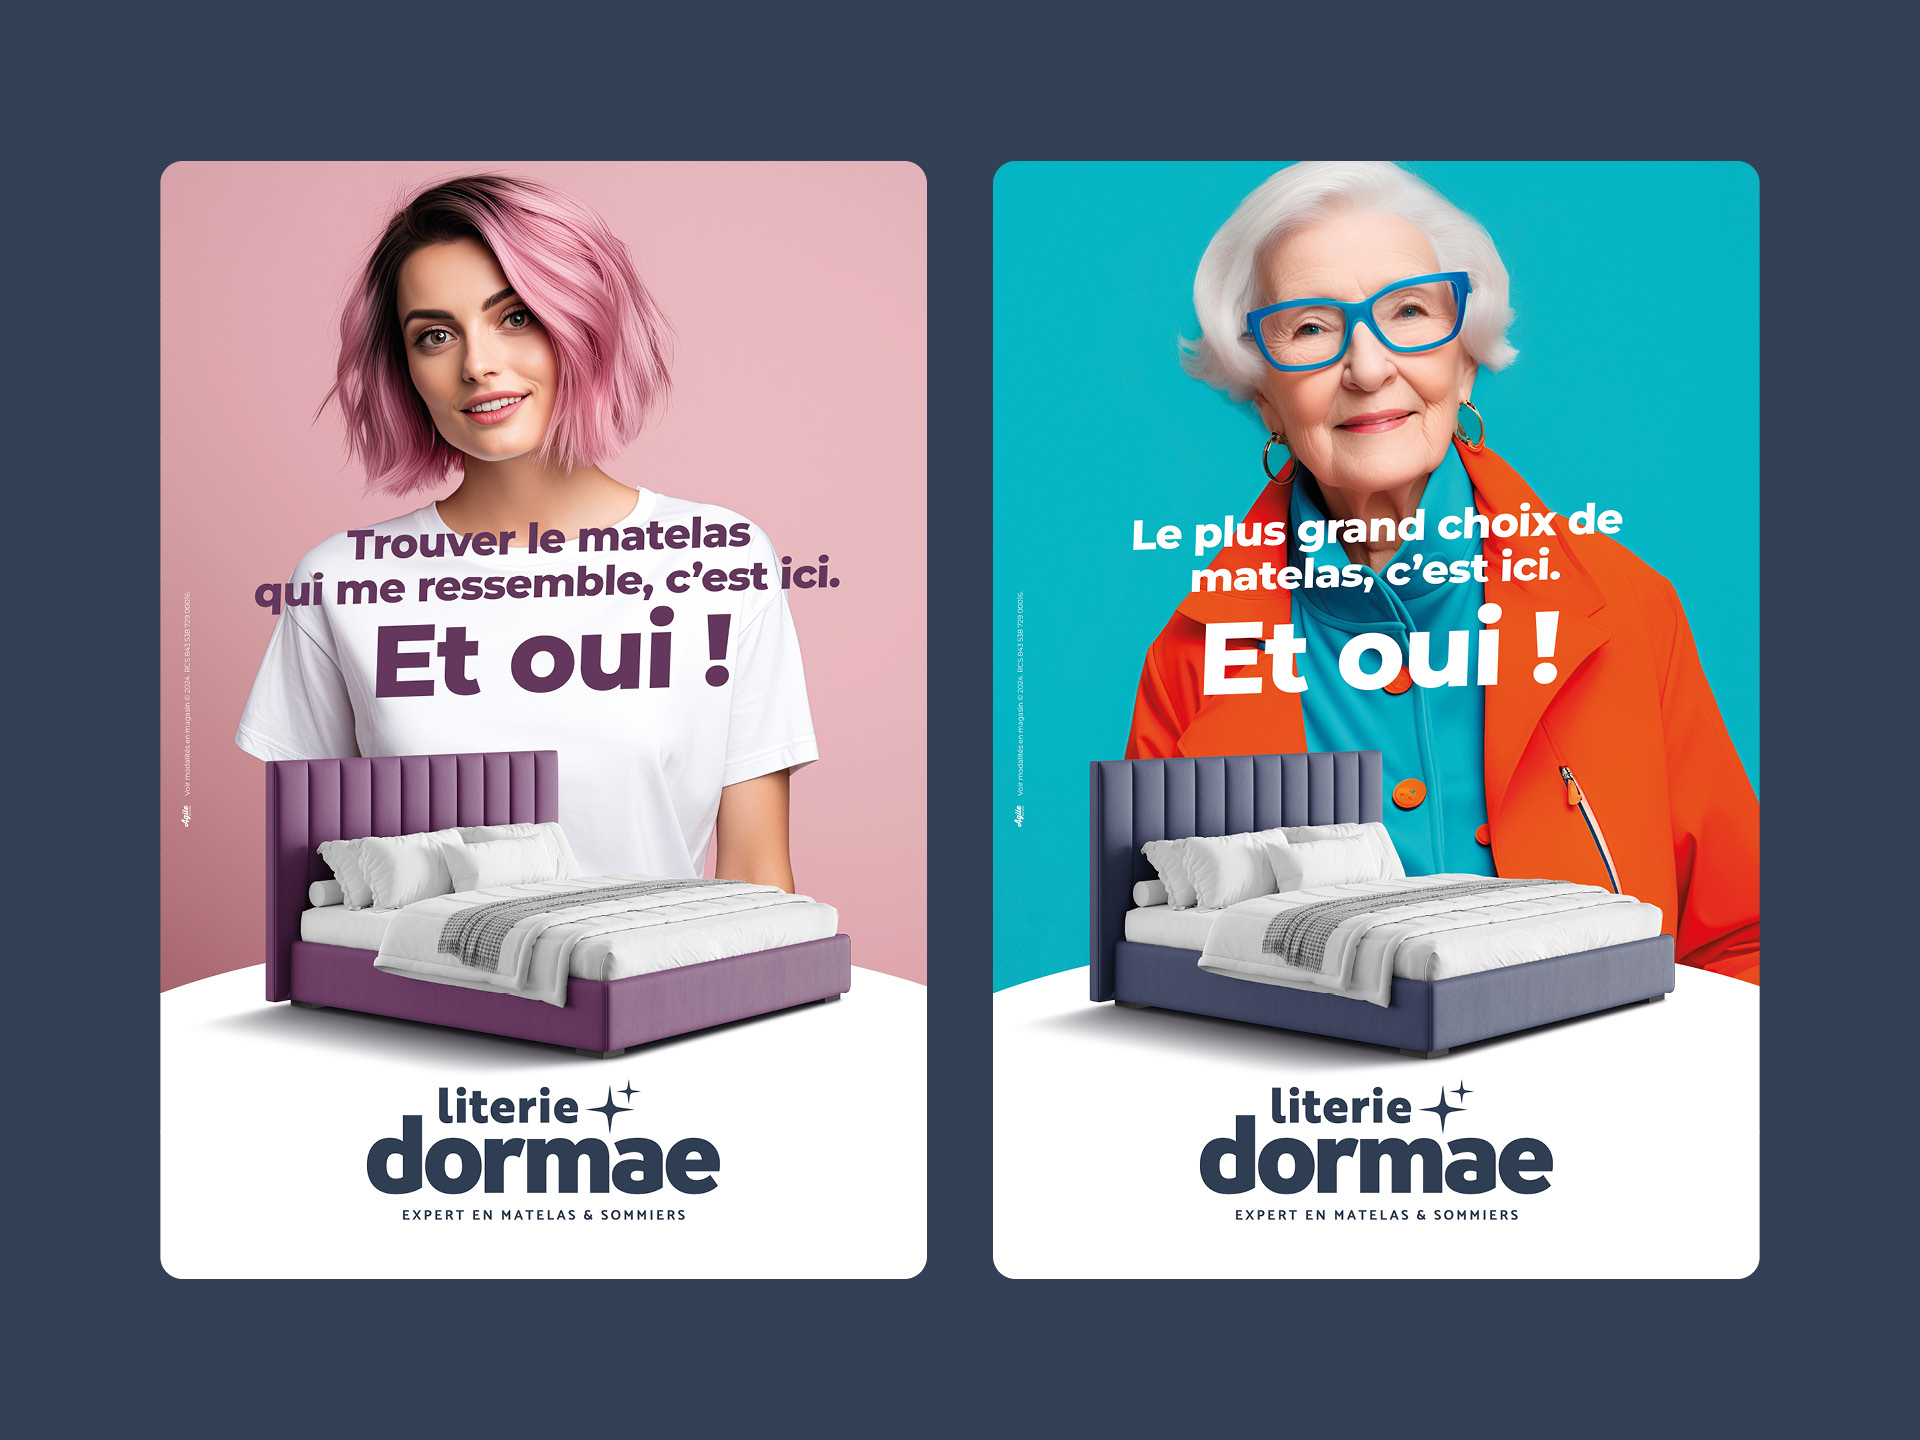 Dormae Literie - Campagne Drive to Store